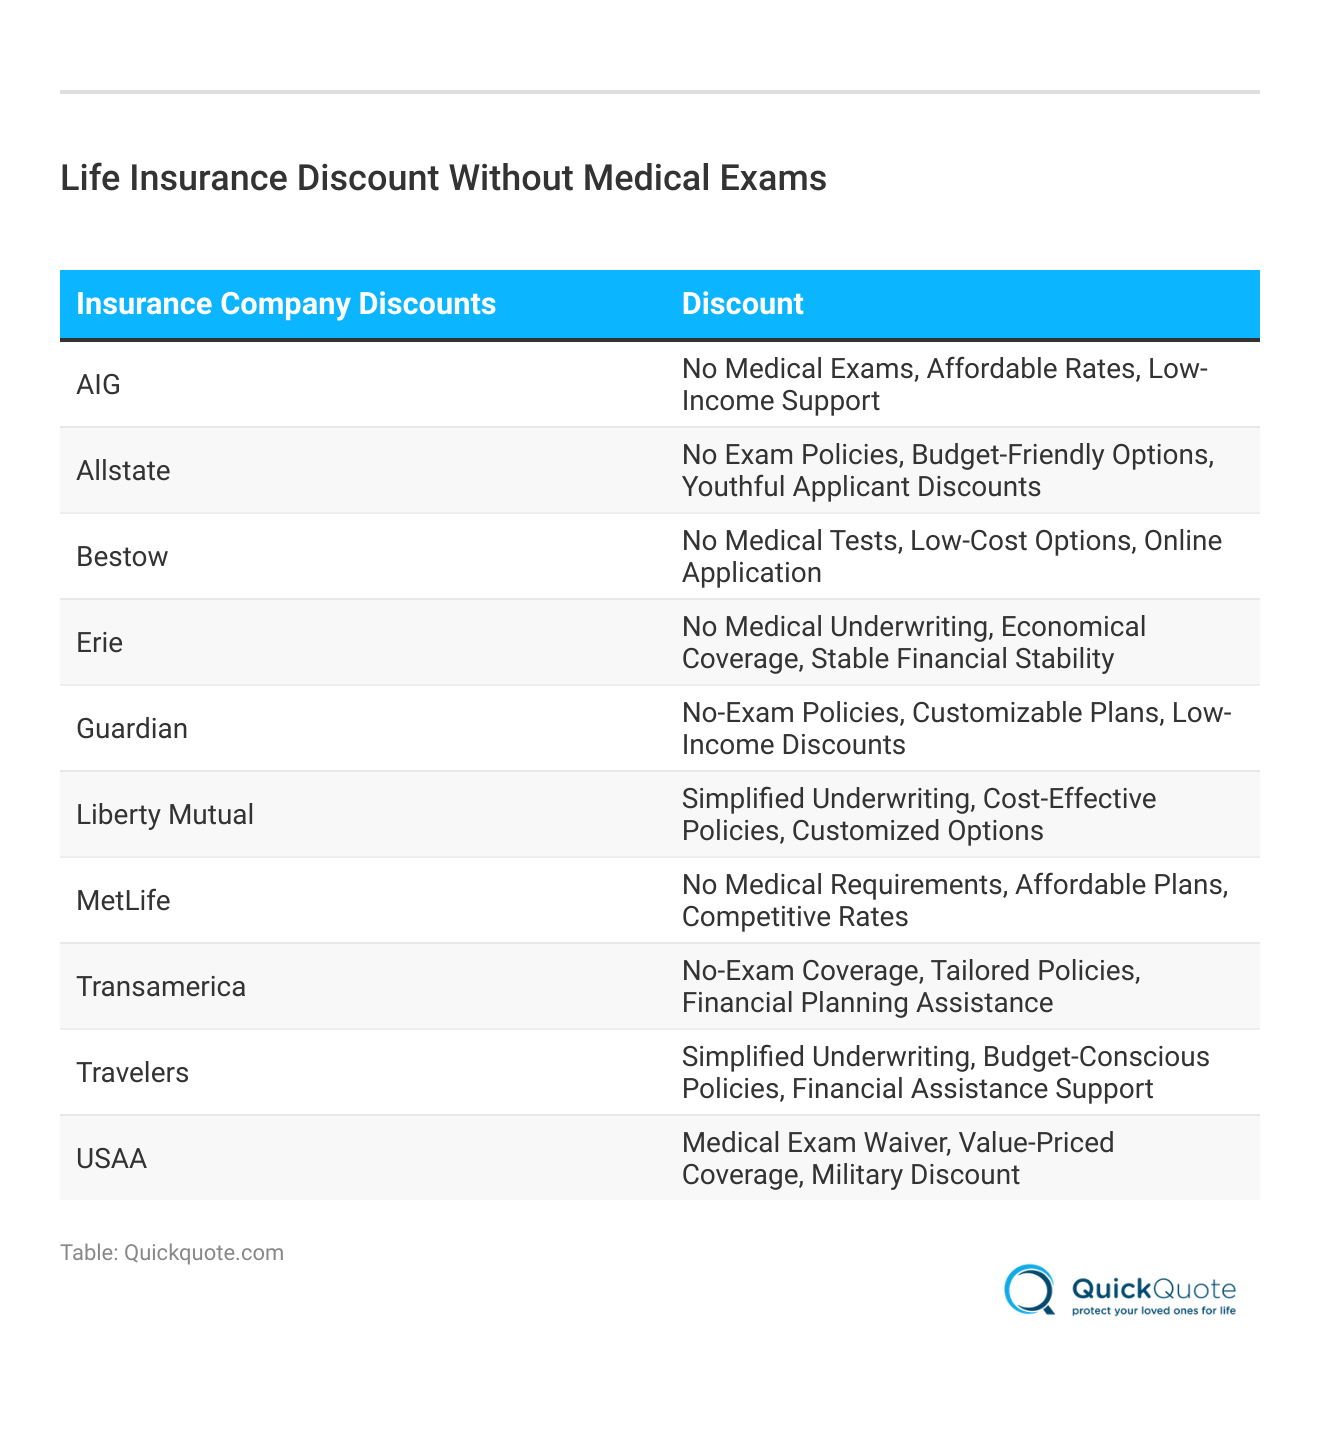 <h3>Life Insurance Discount Without Medical Exams</h3>